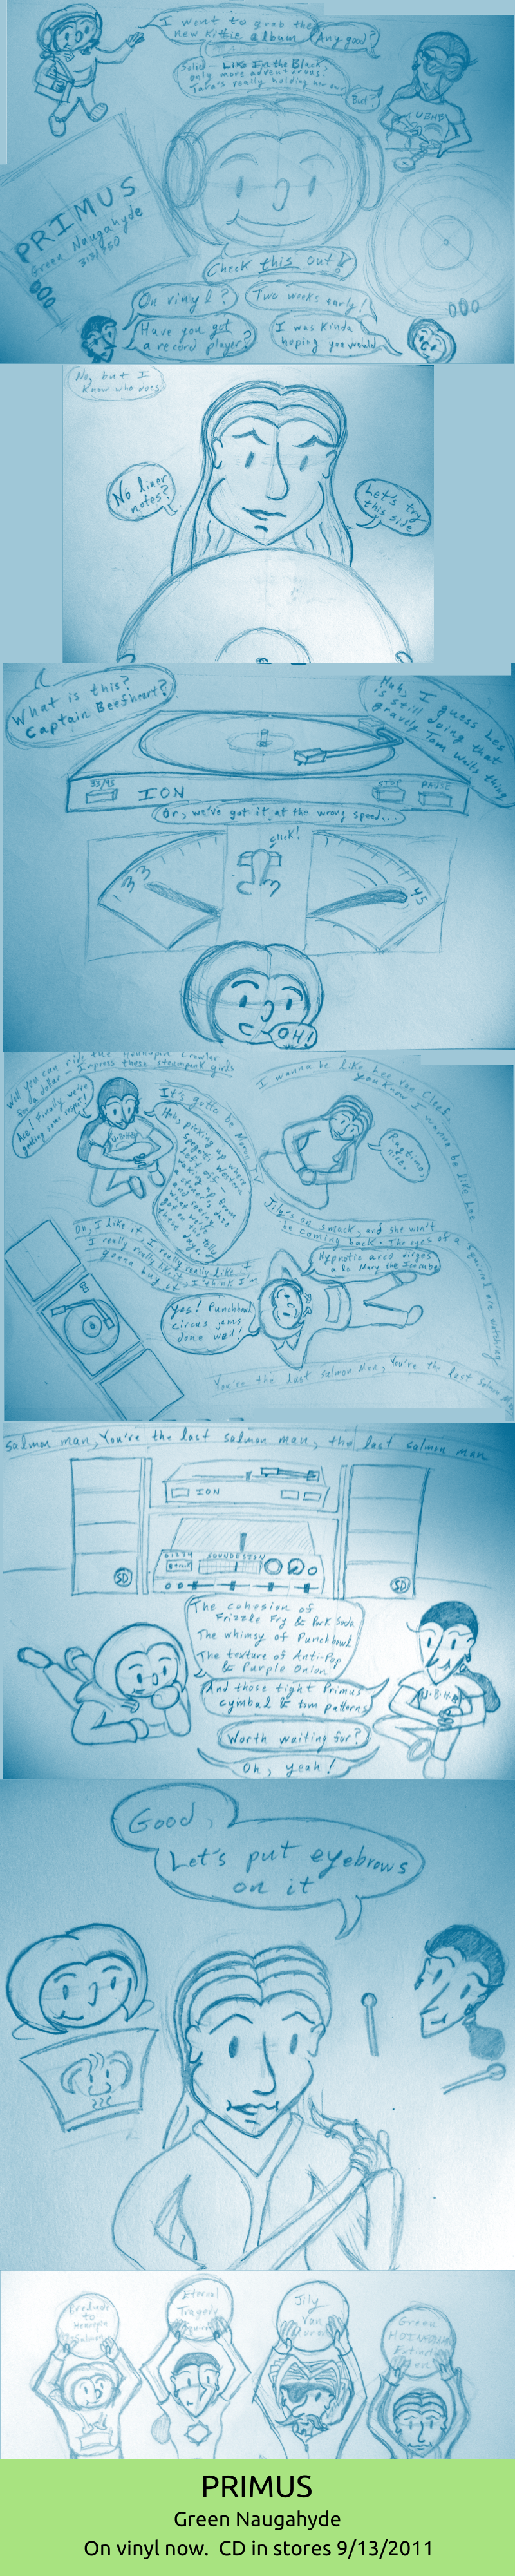 Comic. Follow the transcript link at the bottom of page for a text version.